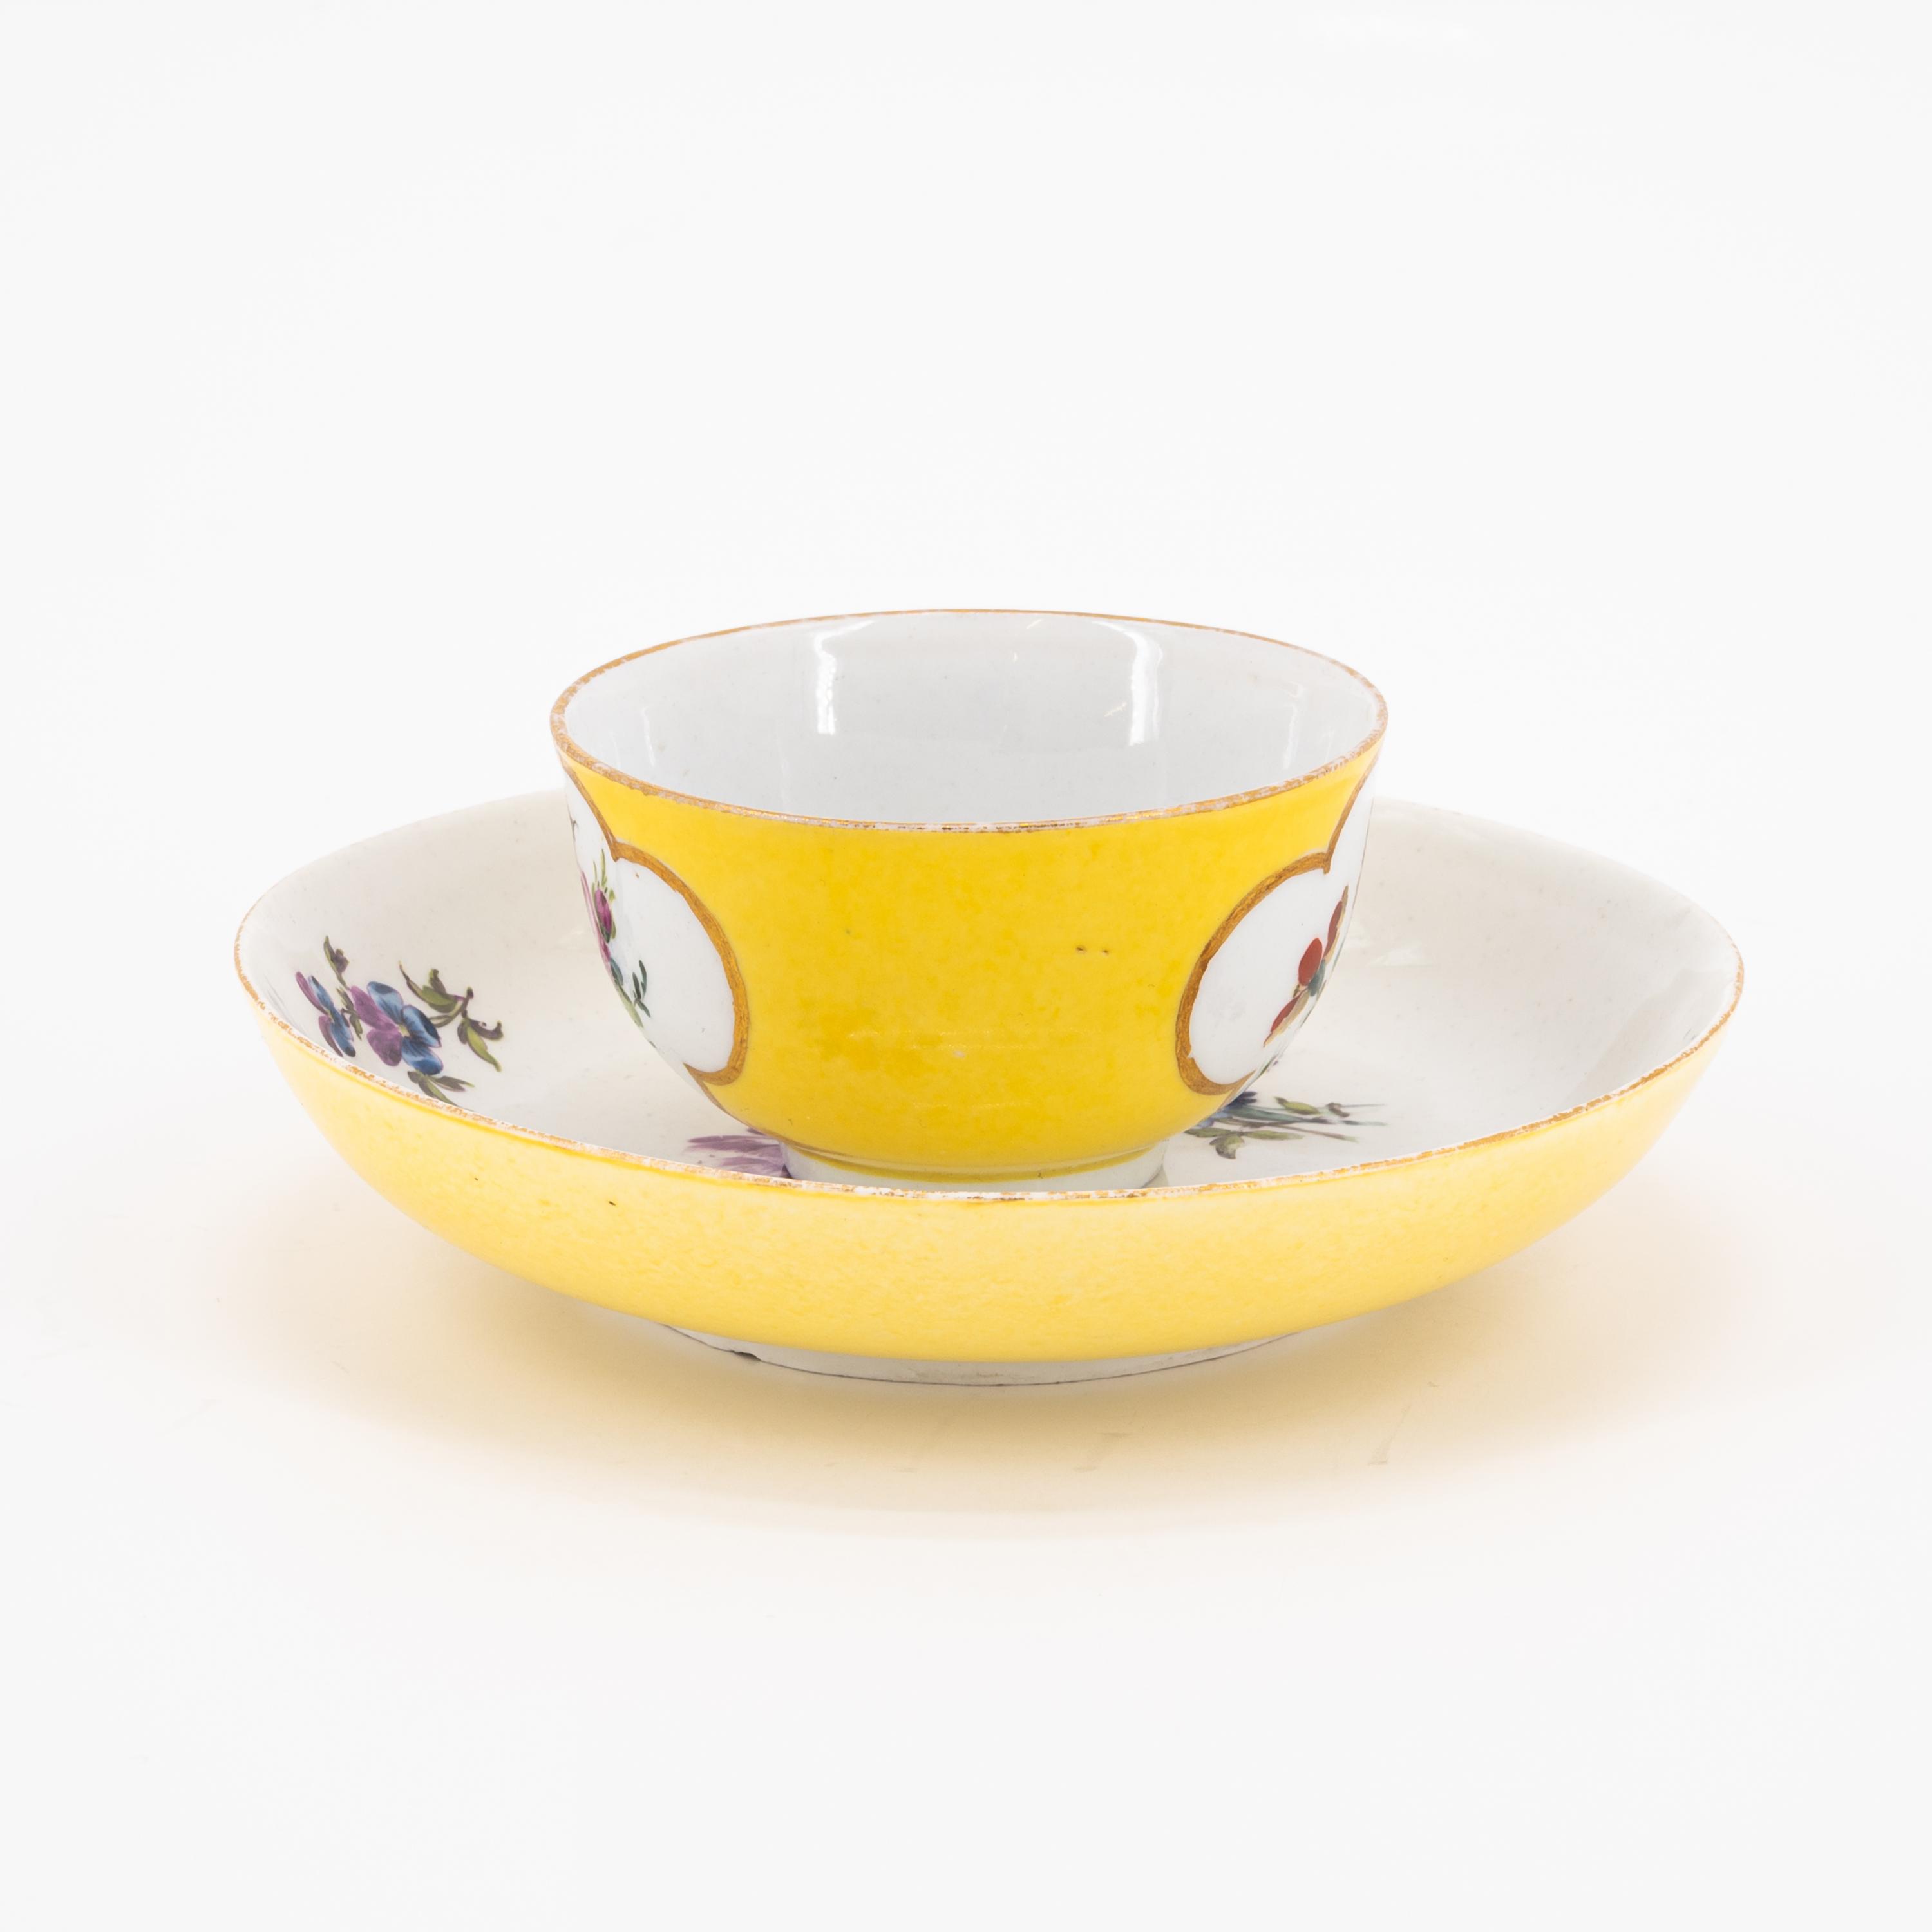 TWO PORCELAIN CUPS AND SAUCERS WITH YELLOW AND ORANGE COLOURED GROUND AS WELL AS FLORAL DECOR - Image 4 of 11